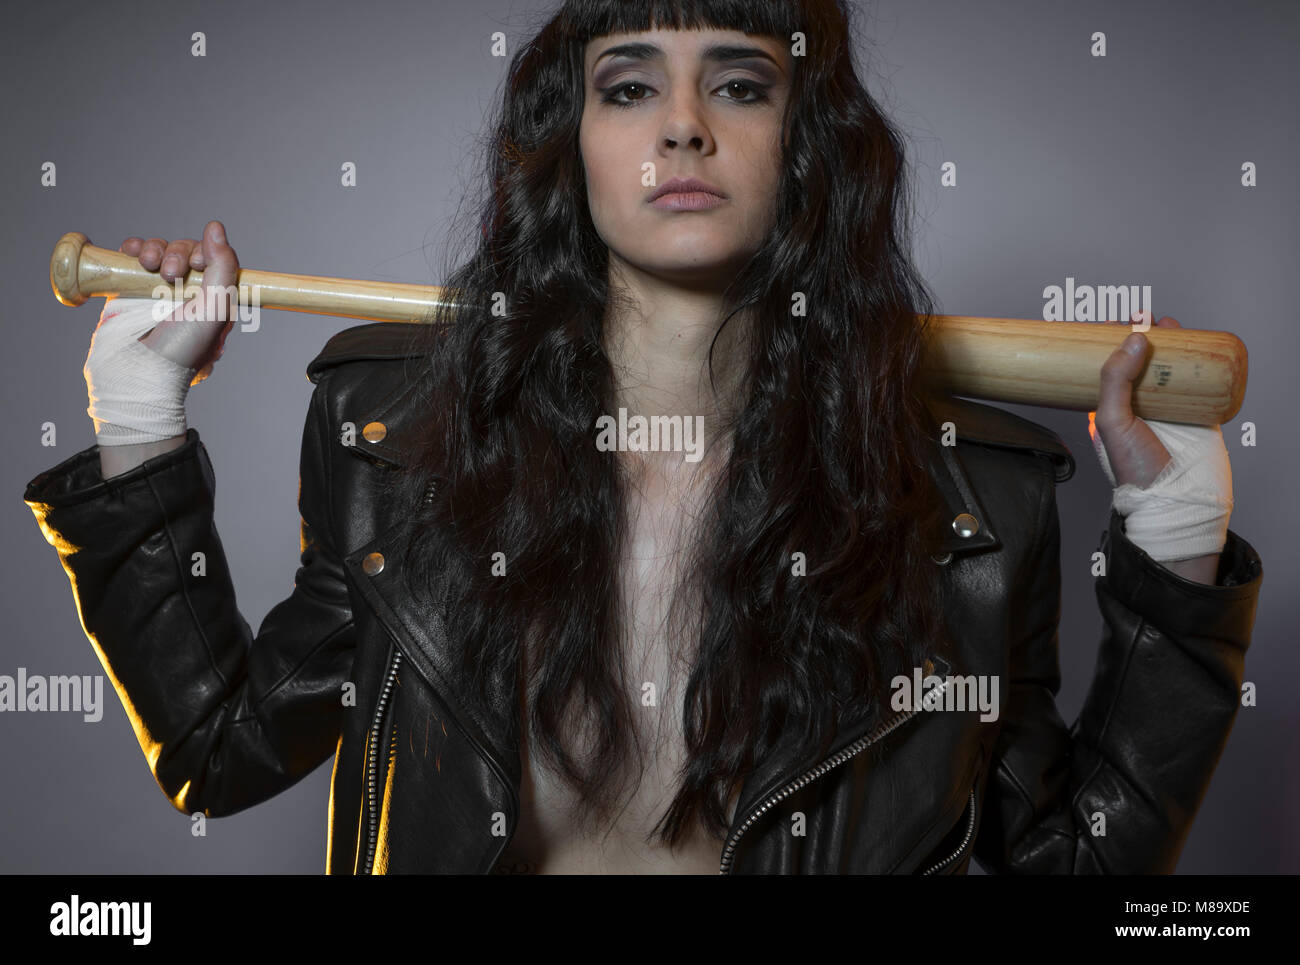 lawbreaker, adolescence and delinquency, brunette woman in leather jacket and baseball bat with challenging aptitude Stock Photo